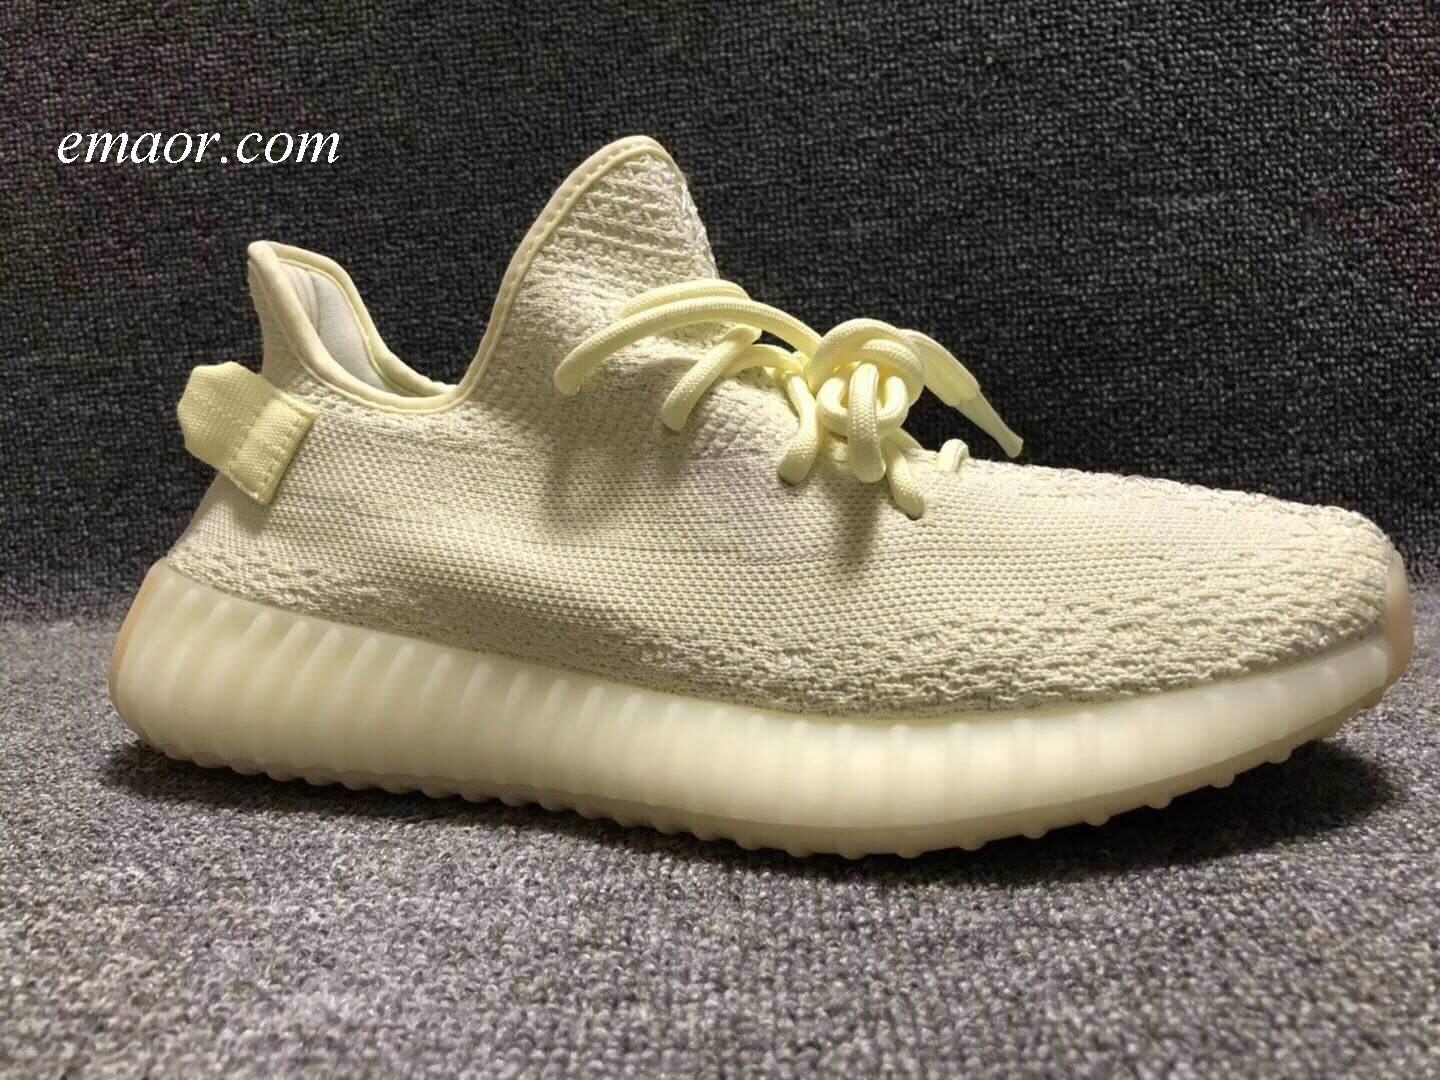 Yeezy Boost 350 V2 Clay Yeezys Air 350 Boost V2 Men's Hiking Breathable ...